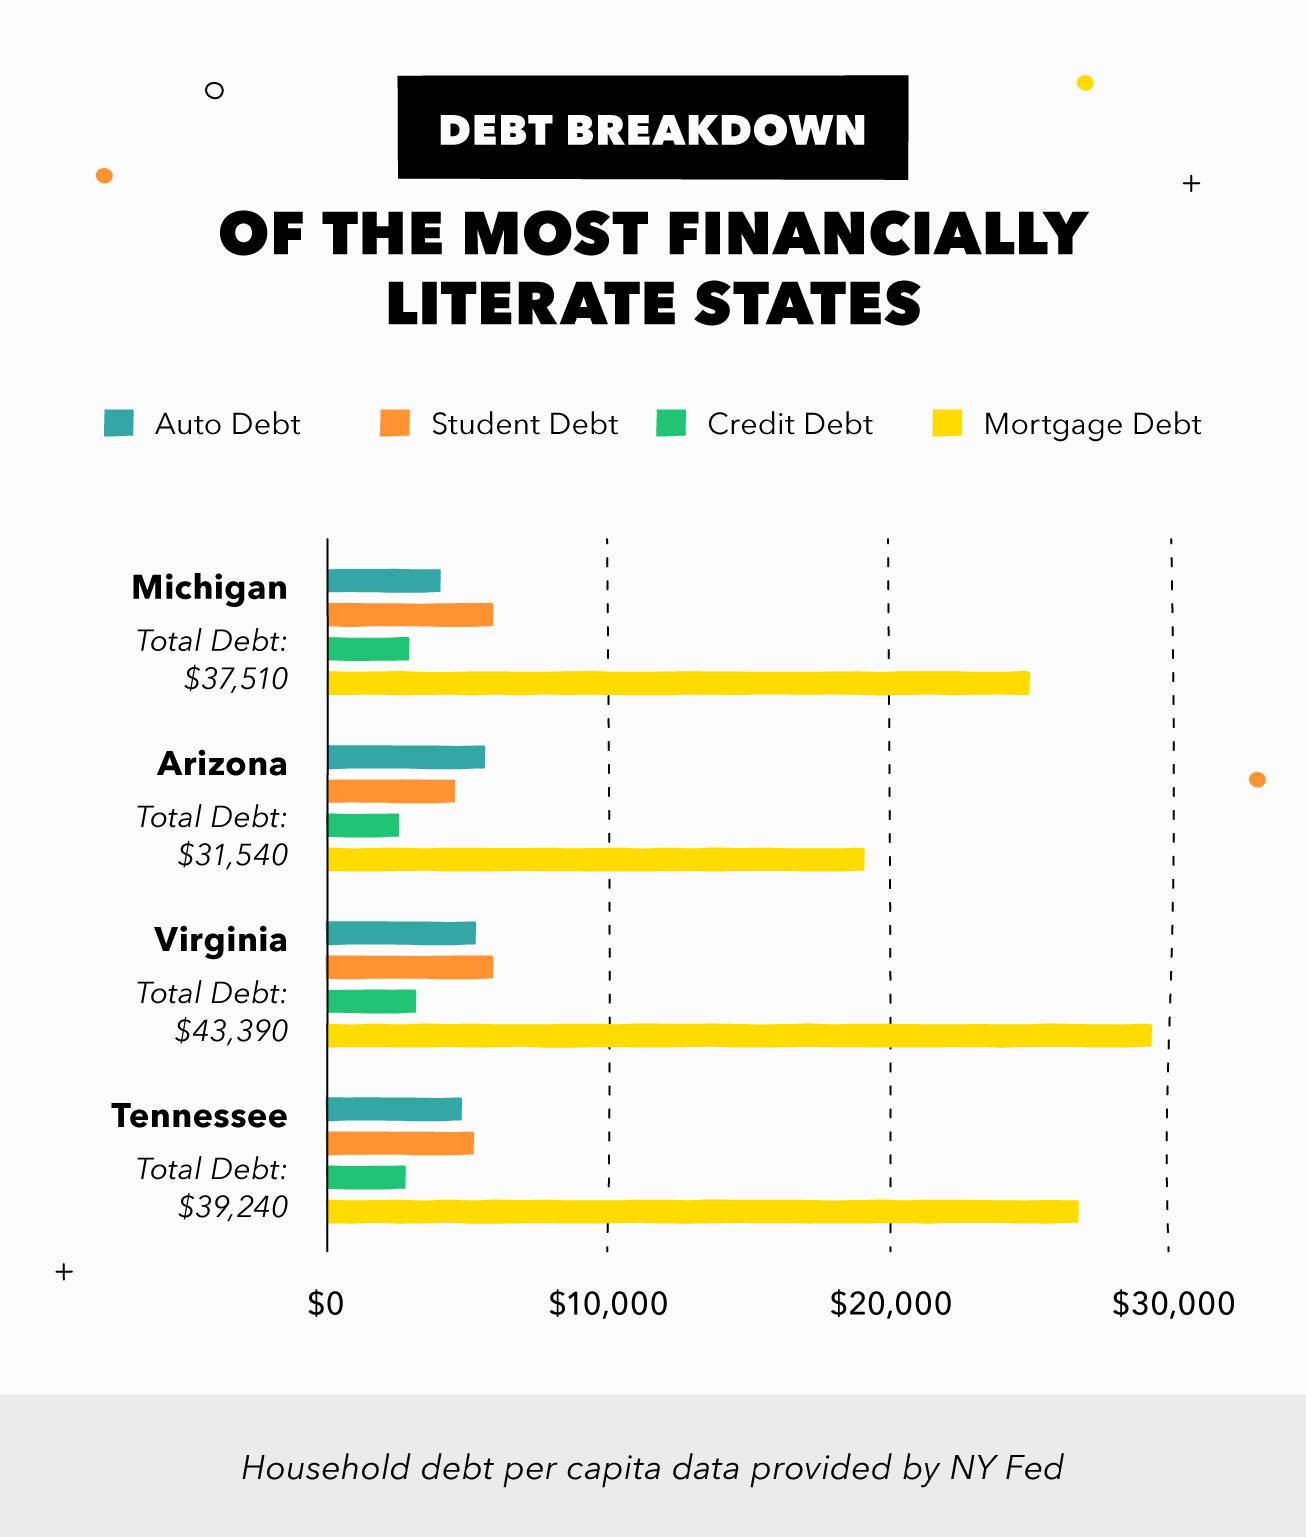 Average individual debt in the most financially-literate states